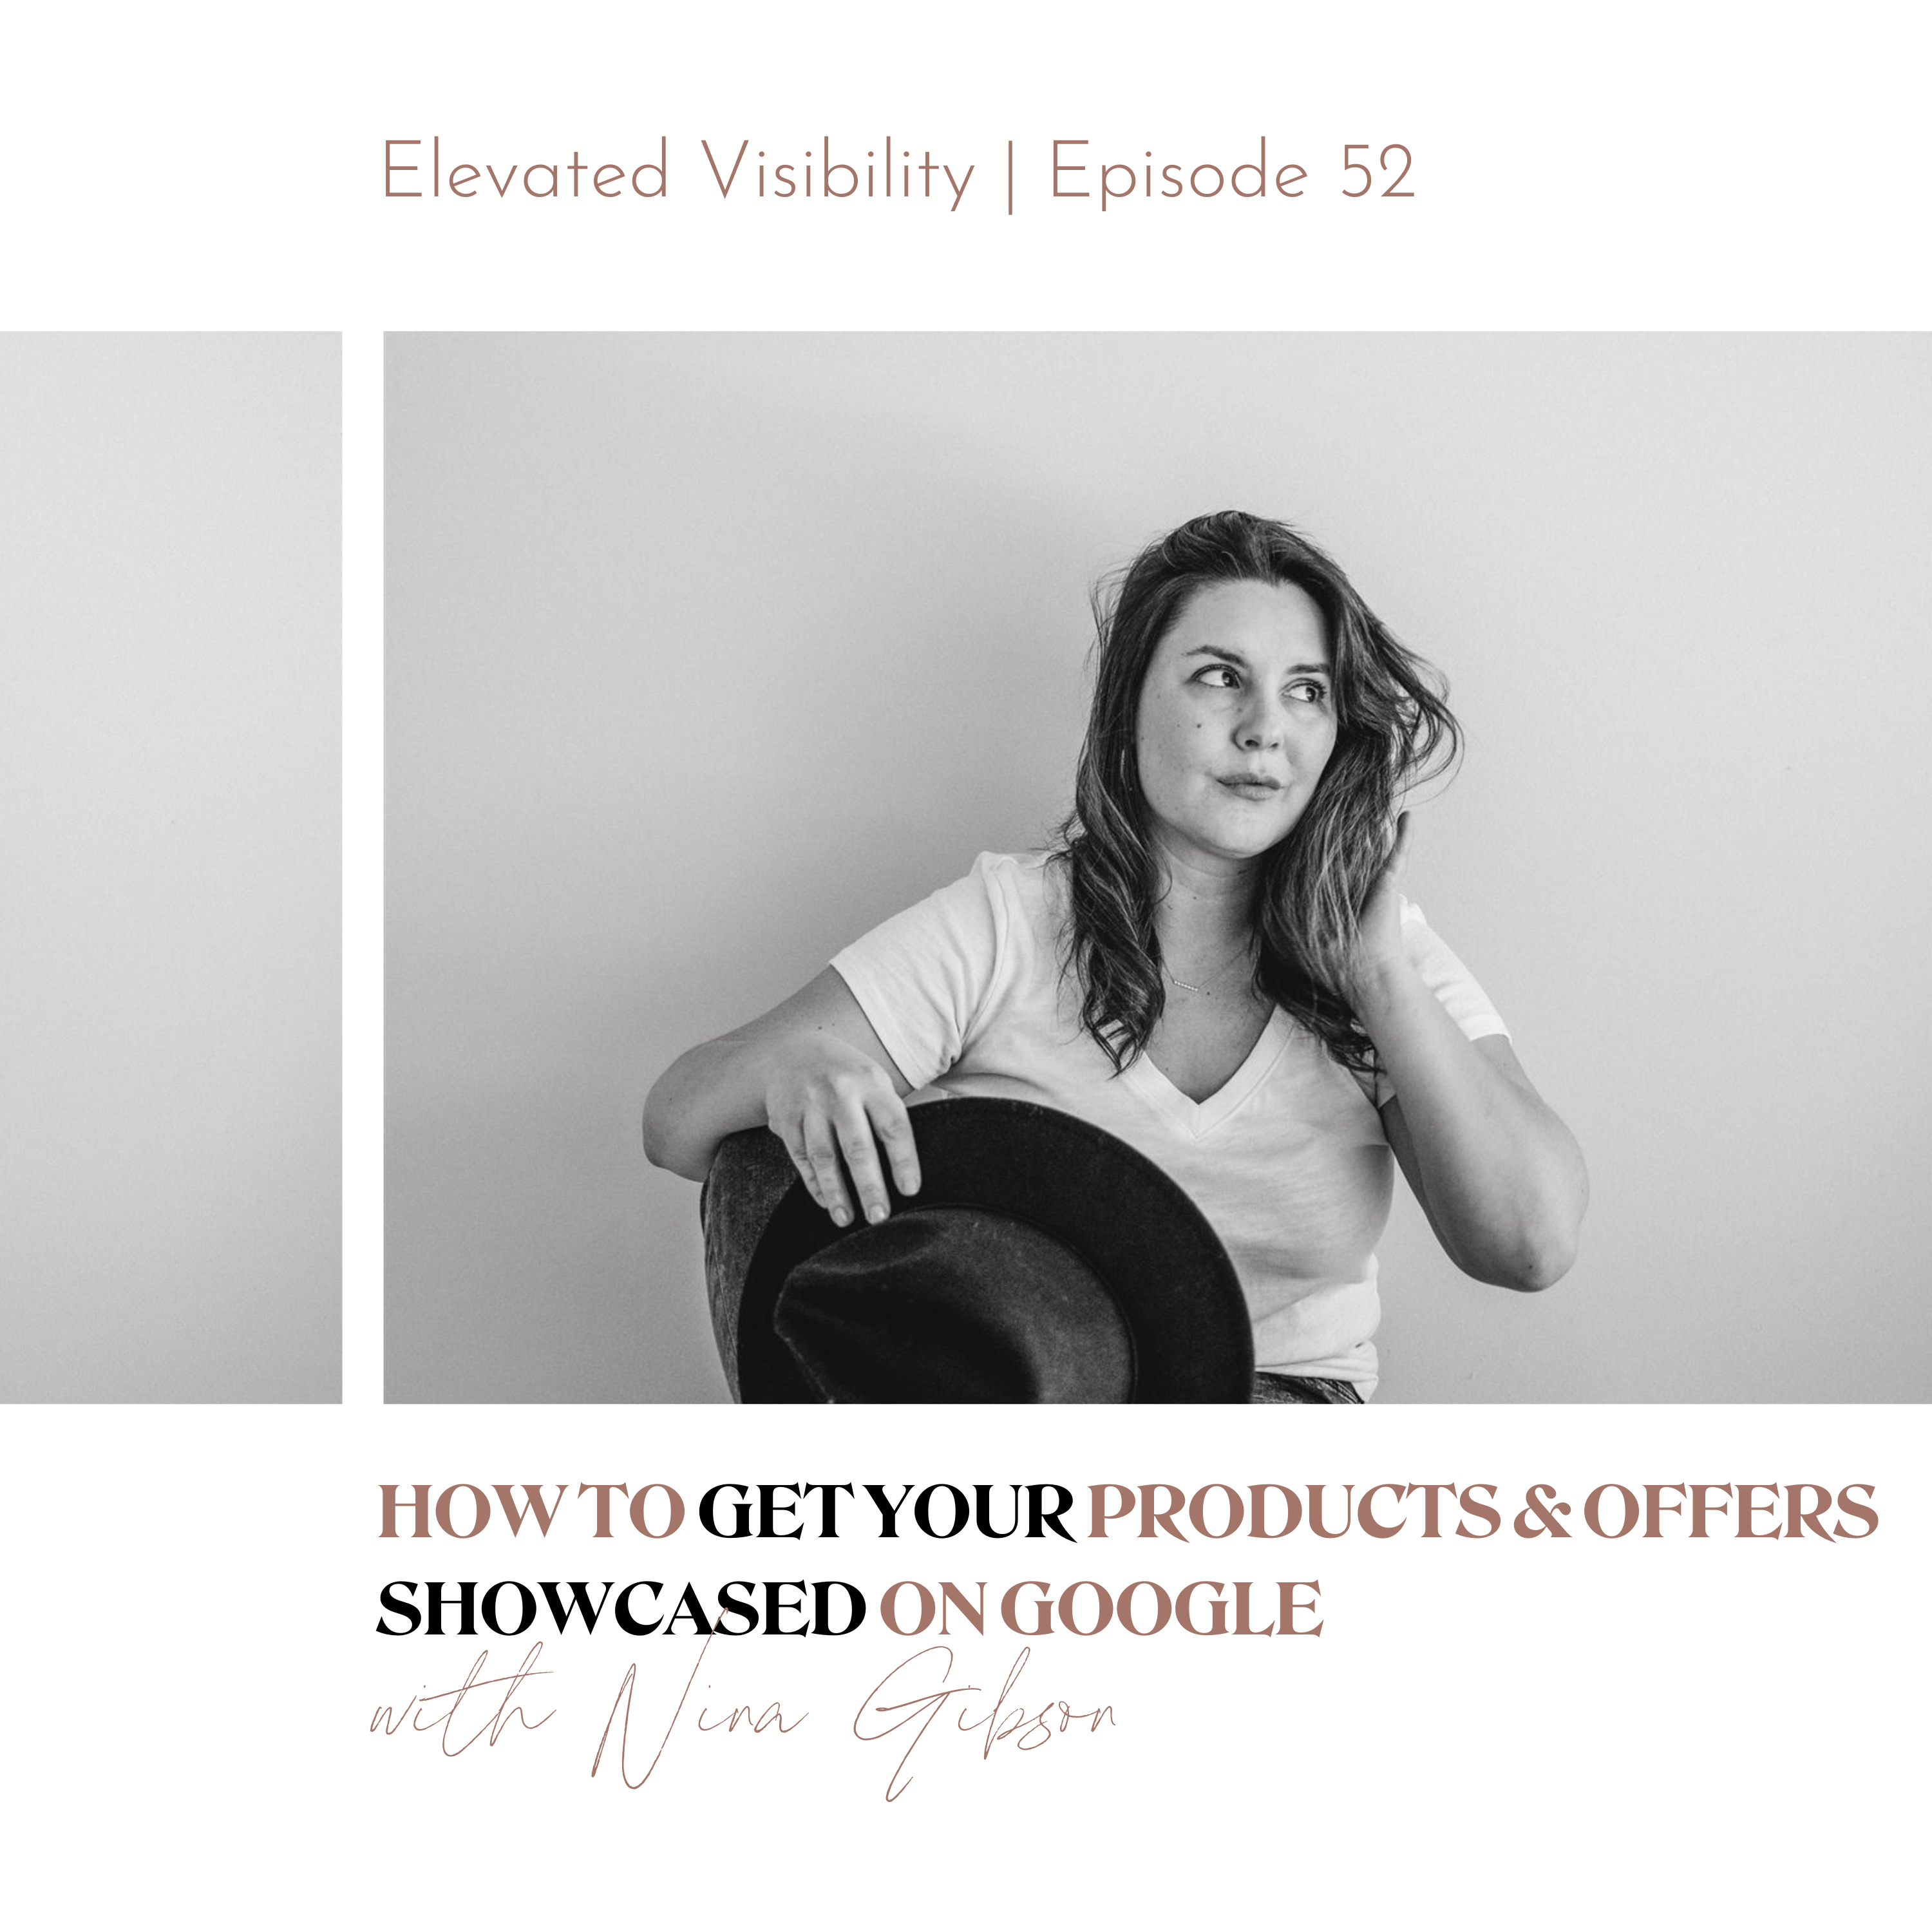 How to Get Your Products & Offers Showcased On Google - Elevated Visibility episode 52 featured image